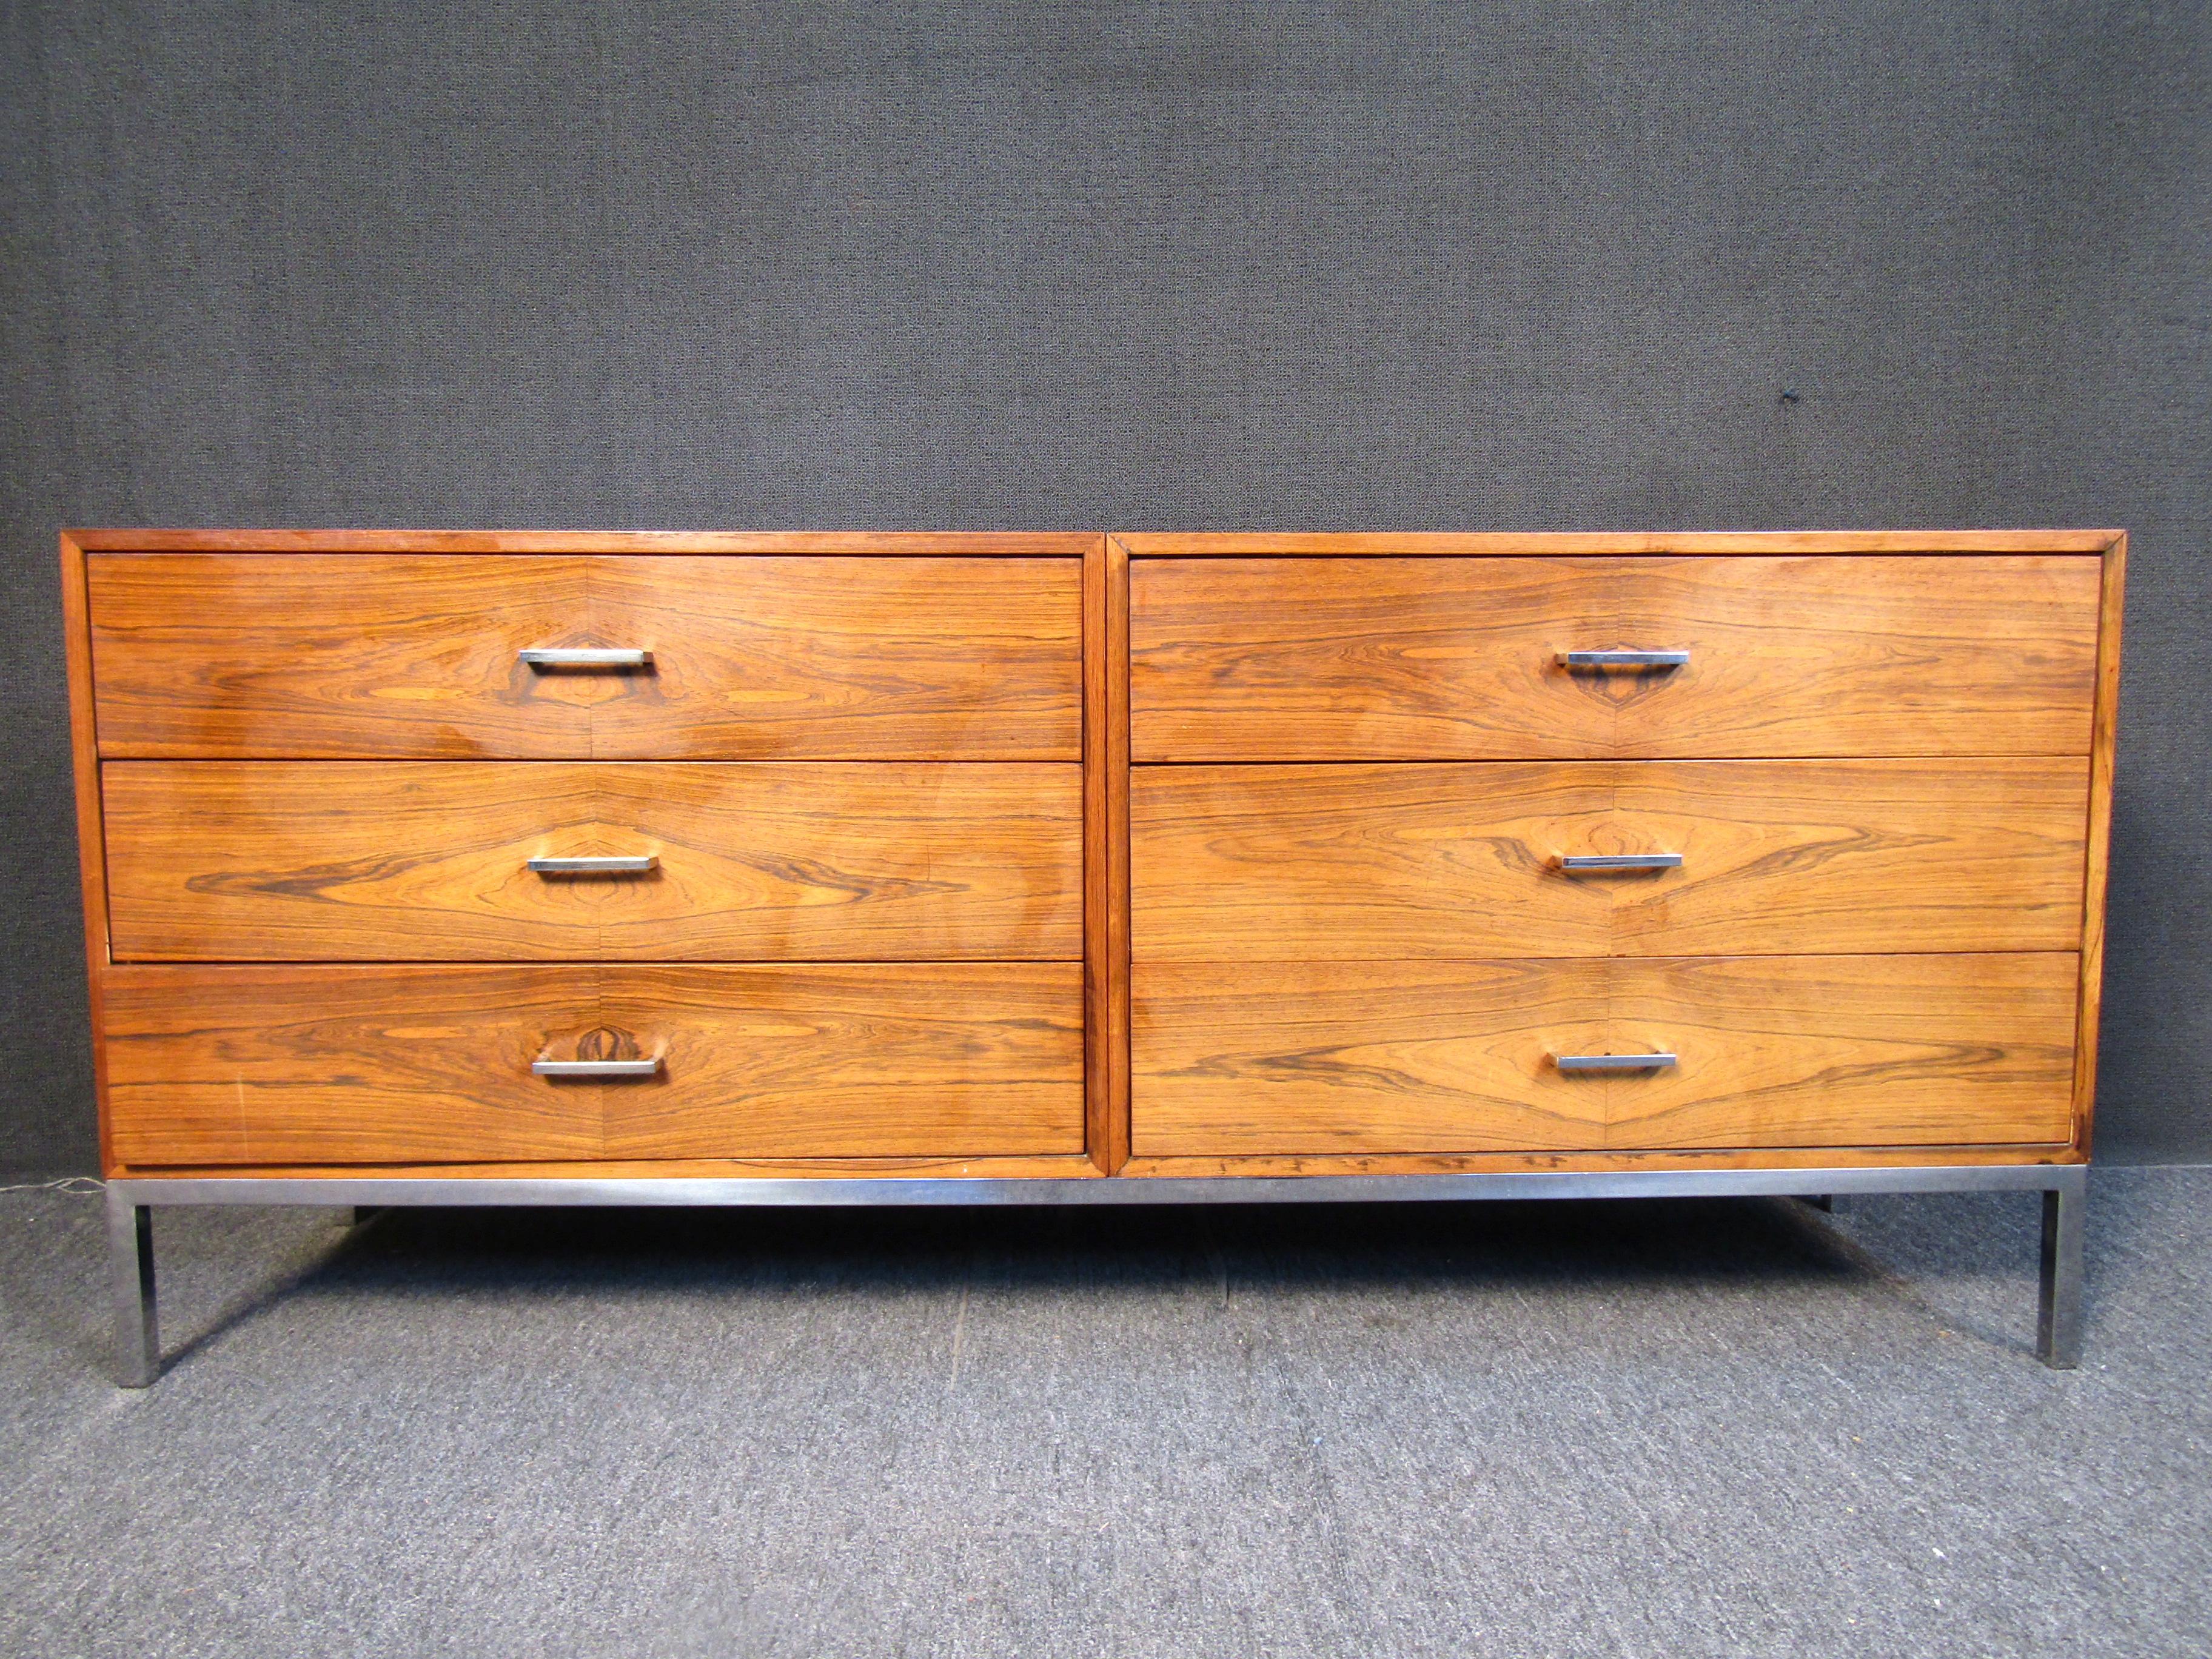 A stunning Mid-Century Modern danish rosewood credenza. A Classic dresser with (6) drawers for optimum storage. A sleek design perfect for any home, office or bedroom setting. Please confirm item location with seller (NY/NJ).